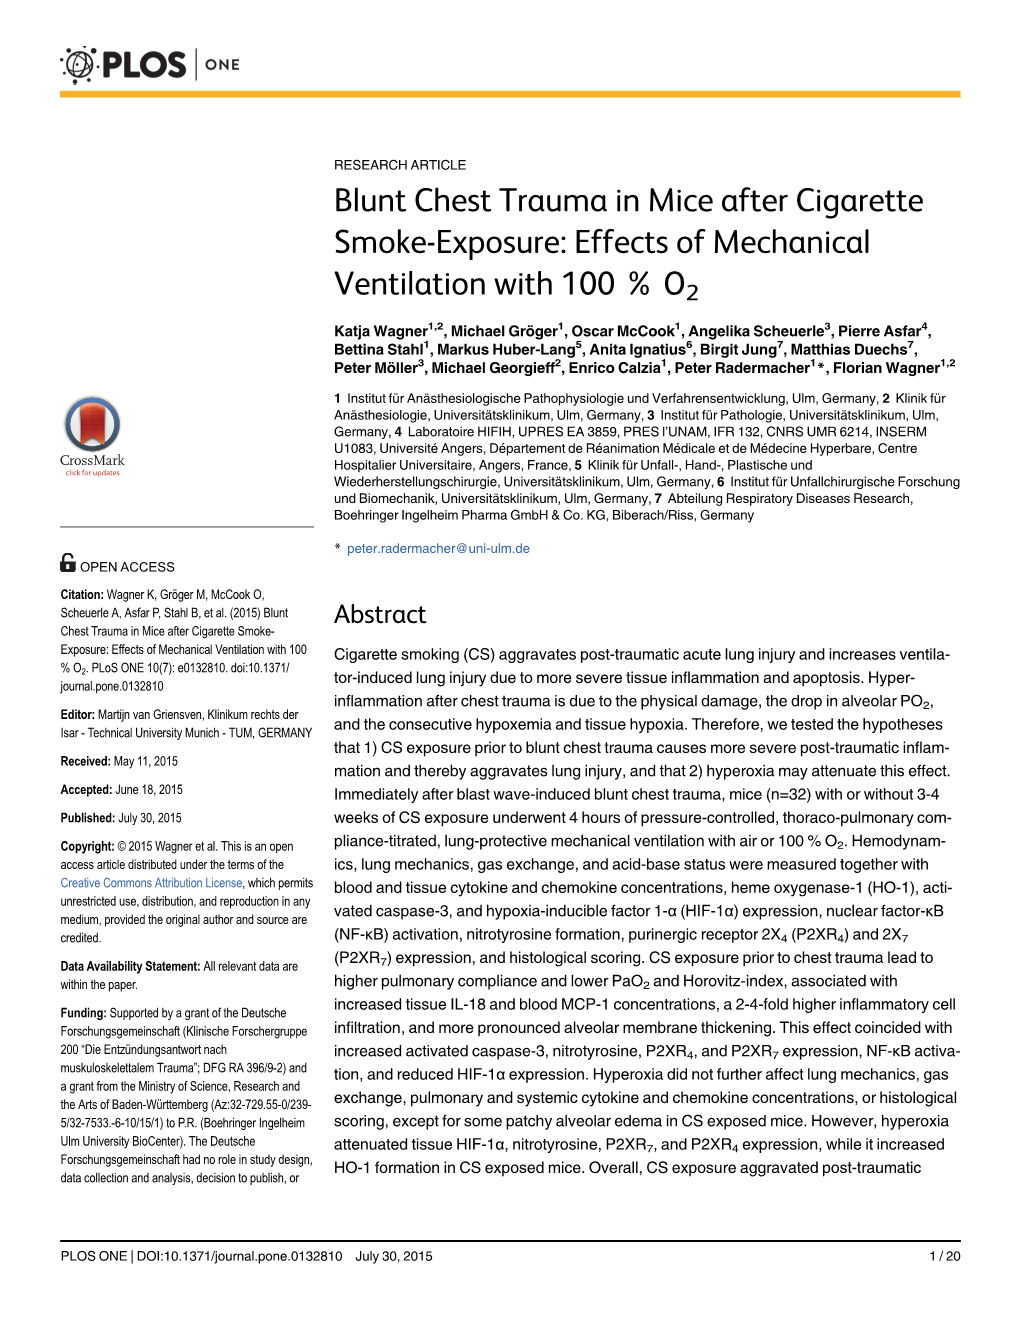 Blunt Chest Trauma in Mice After Cigarette Smoke-Exposure: Effects of Mechanical